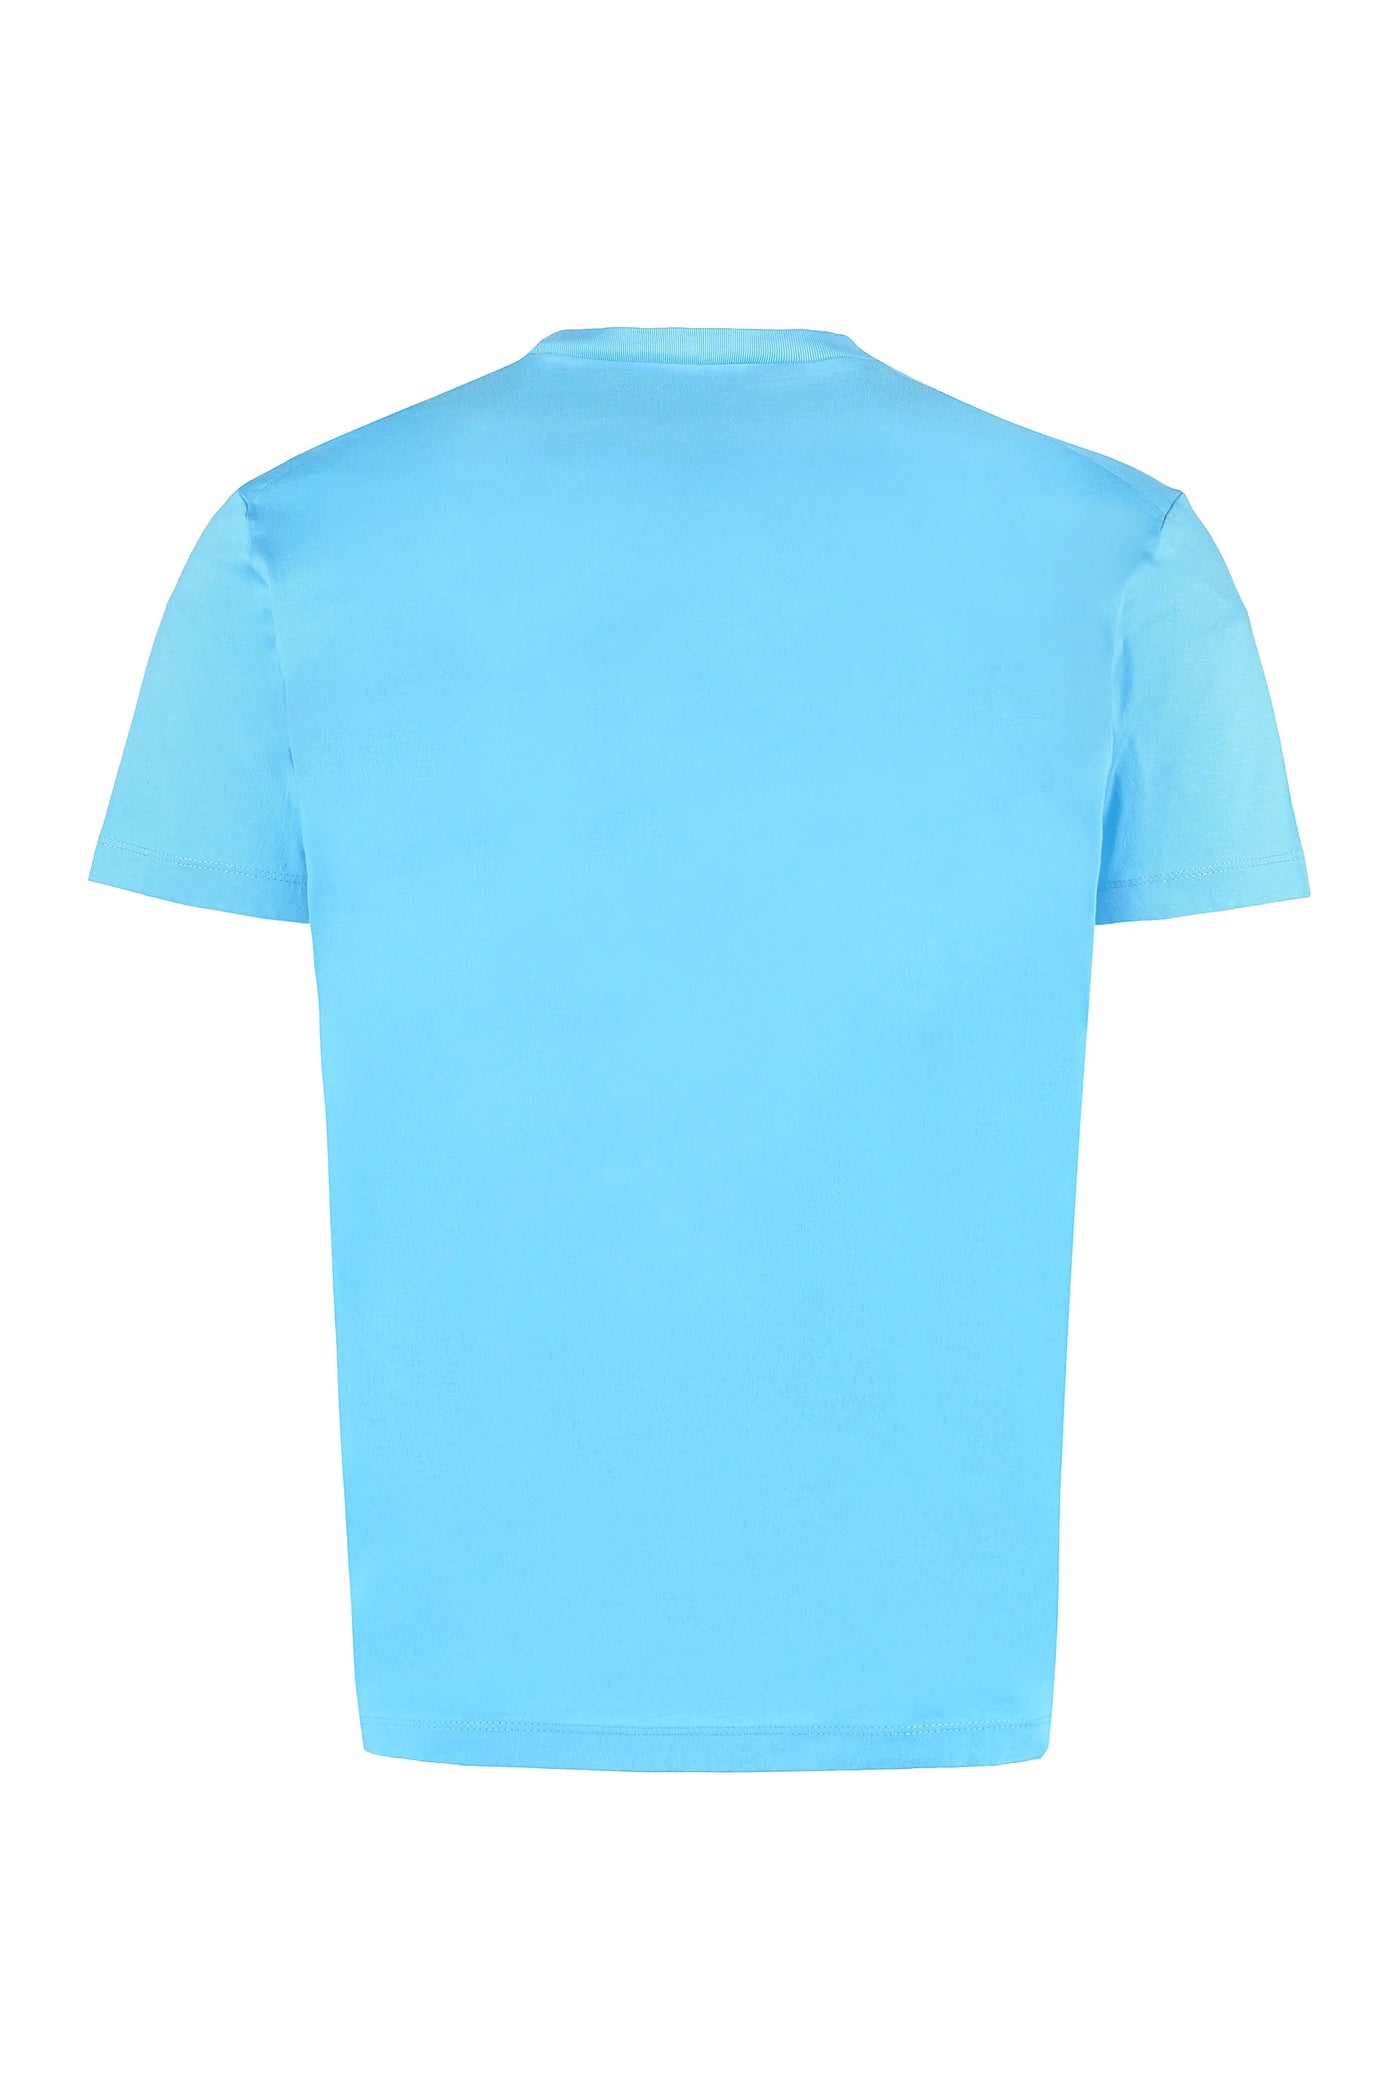 Dsquared2 Icon Printed T-Shirt in Blue